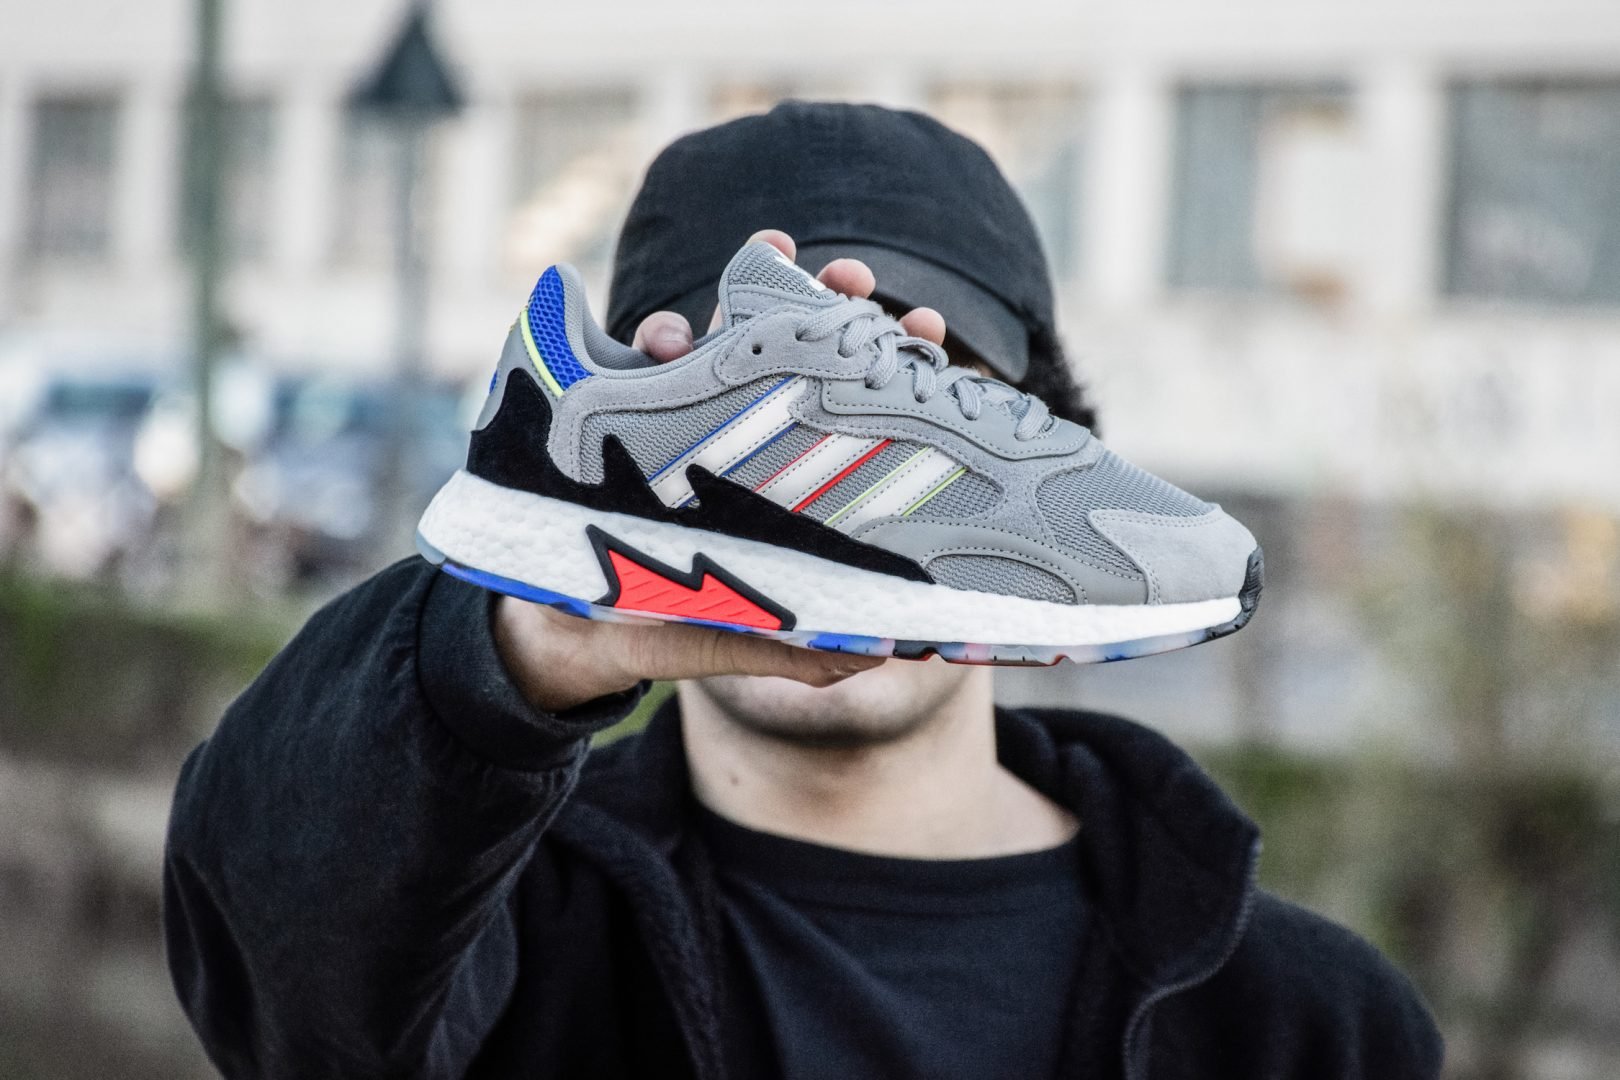 adidas Originals brings the 90s back to life with the TRESC RUN | COLLATER.AL